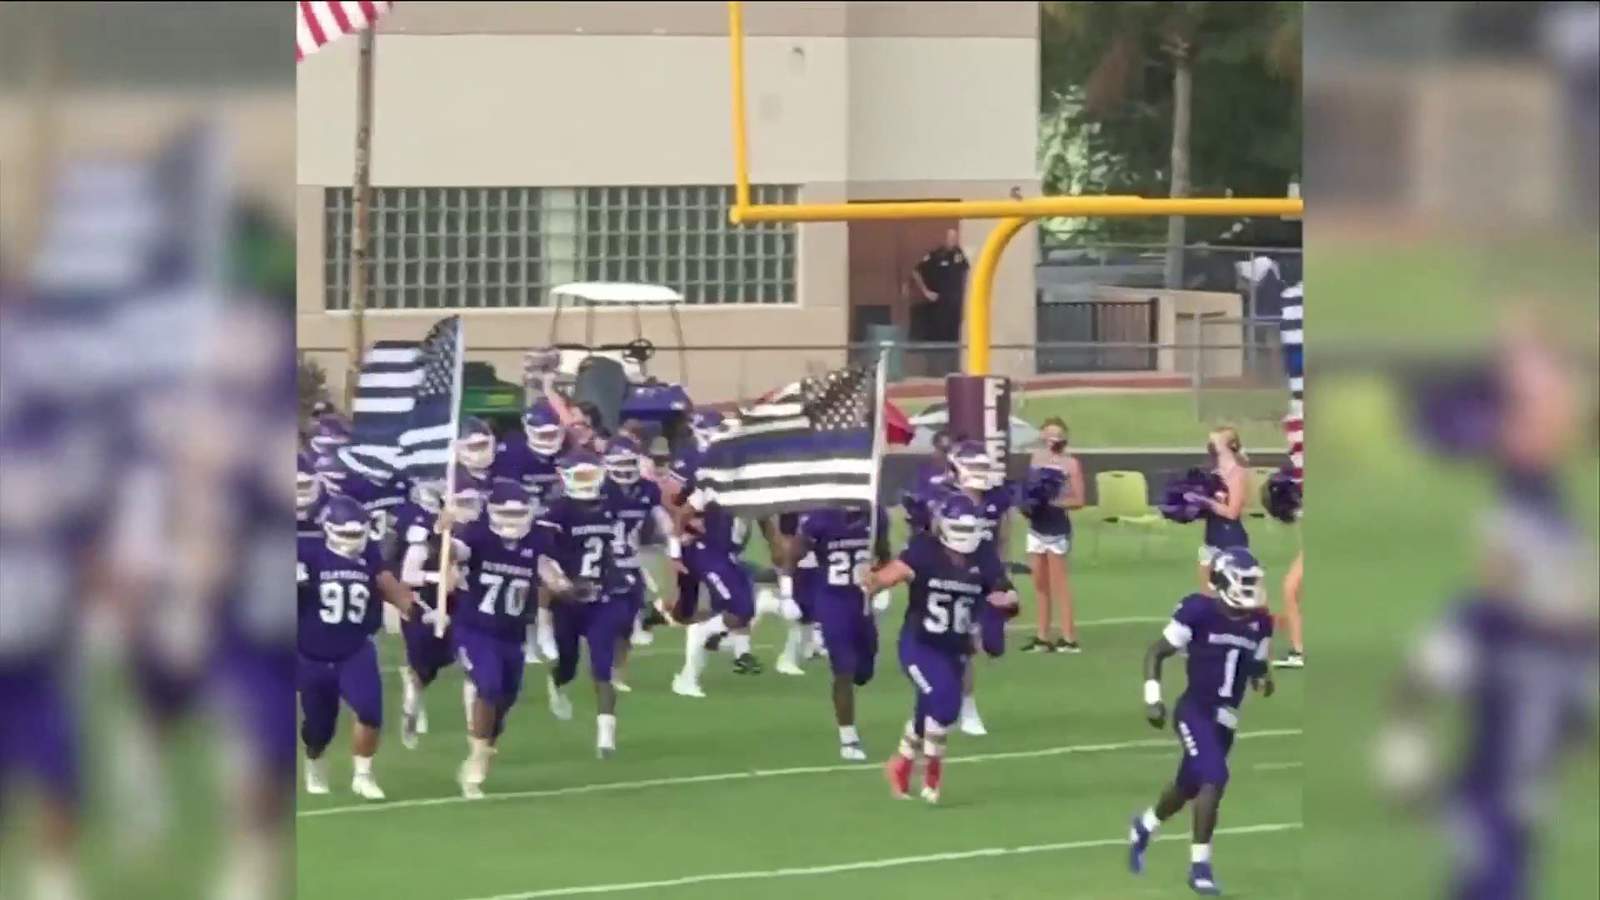 Florida high school bans police flag after controversy